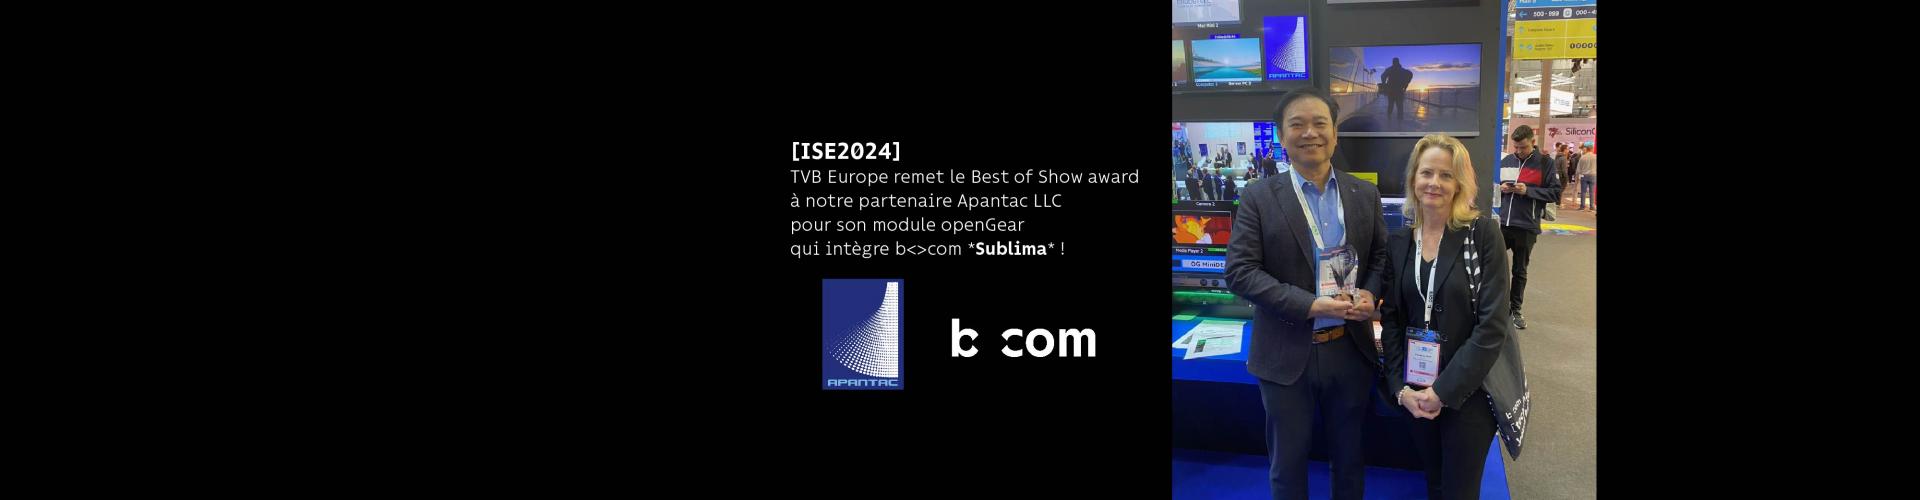 Best of show award ISE